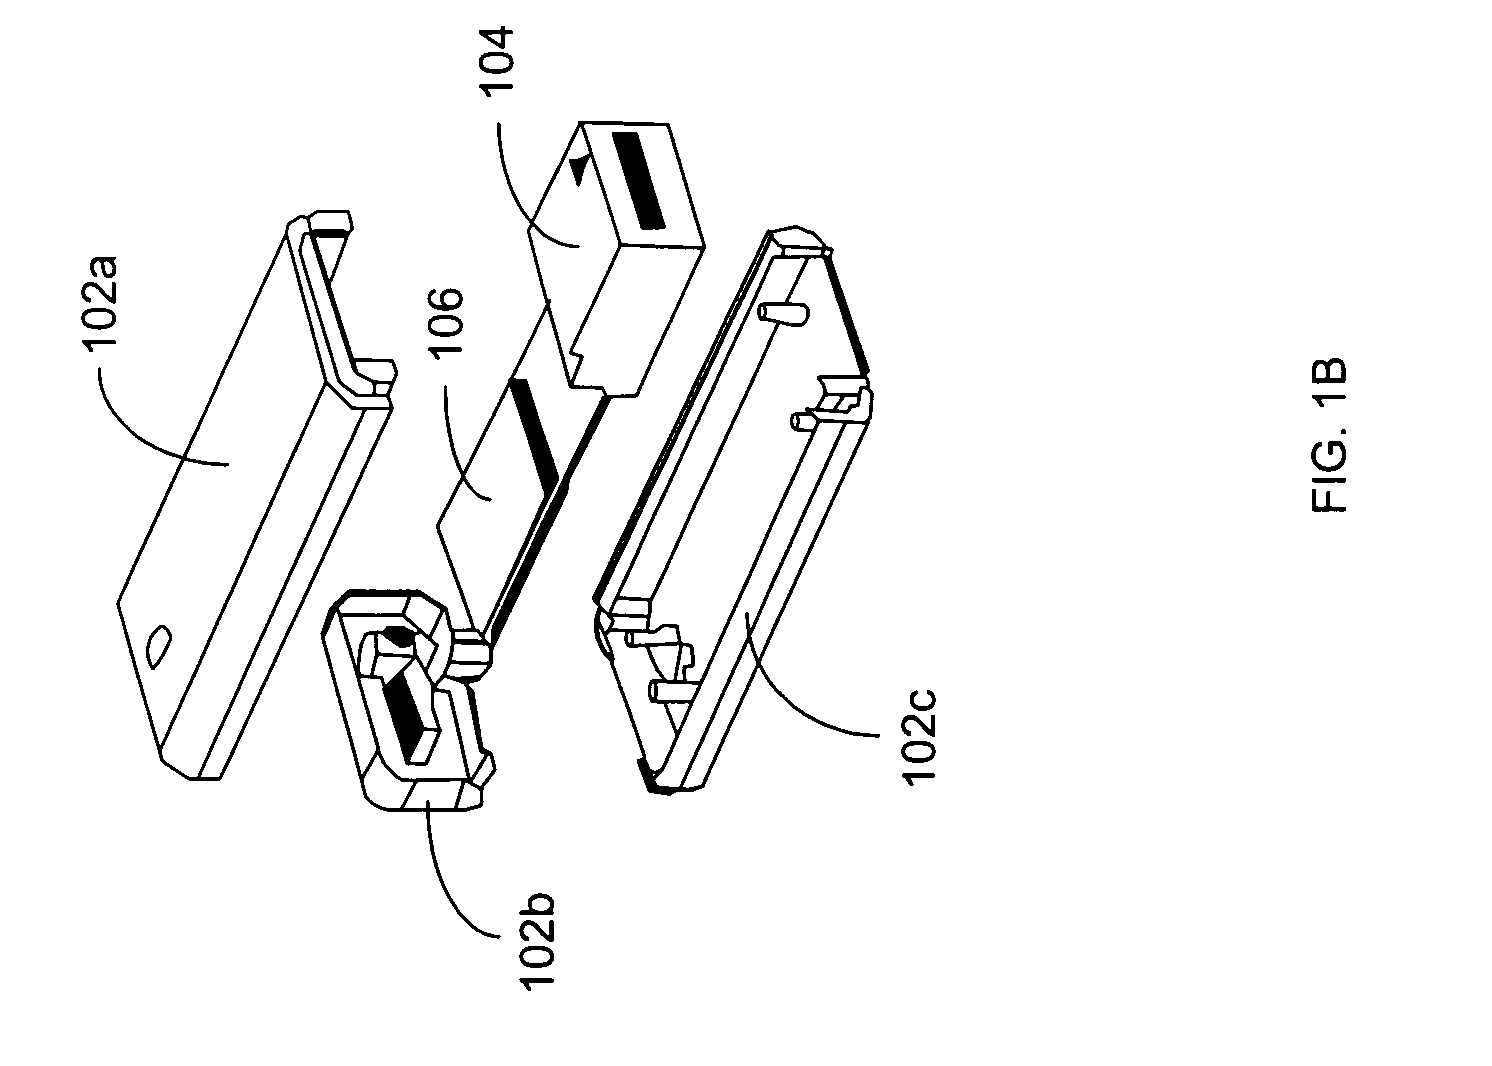 Architectures for external SATA-based flash memory devices